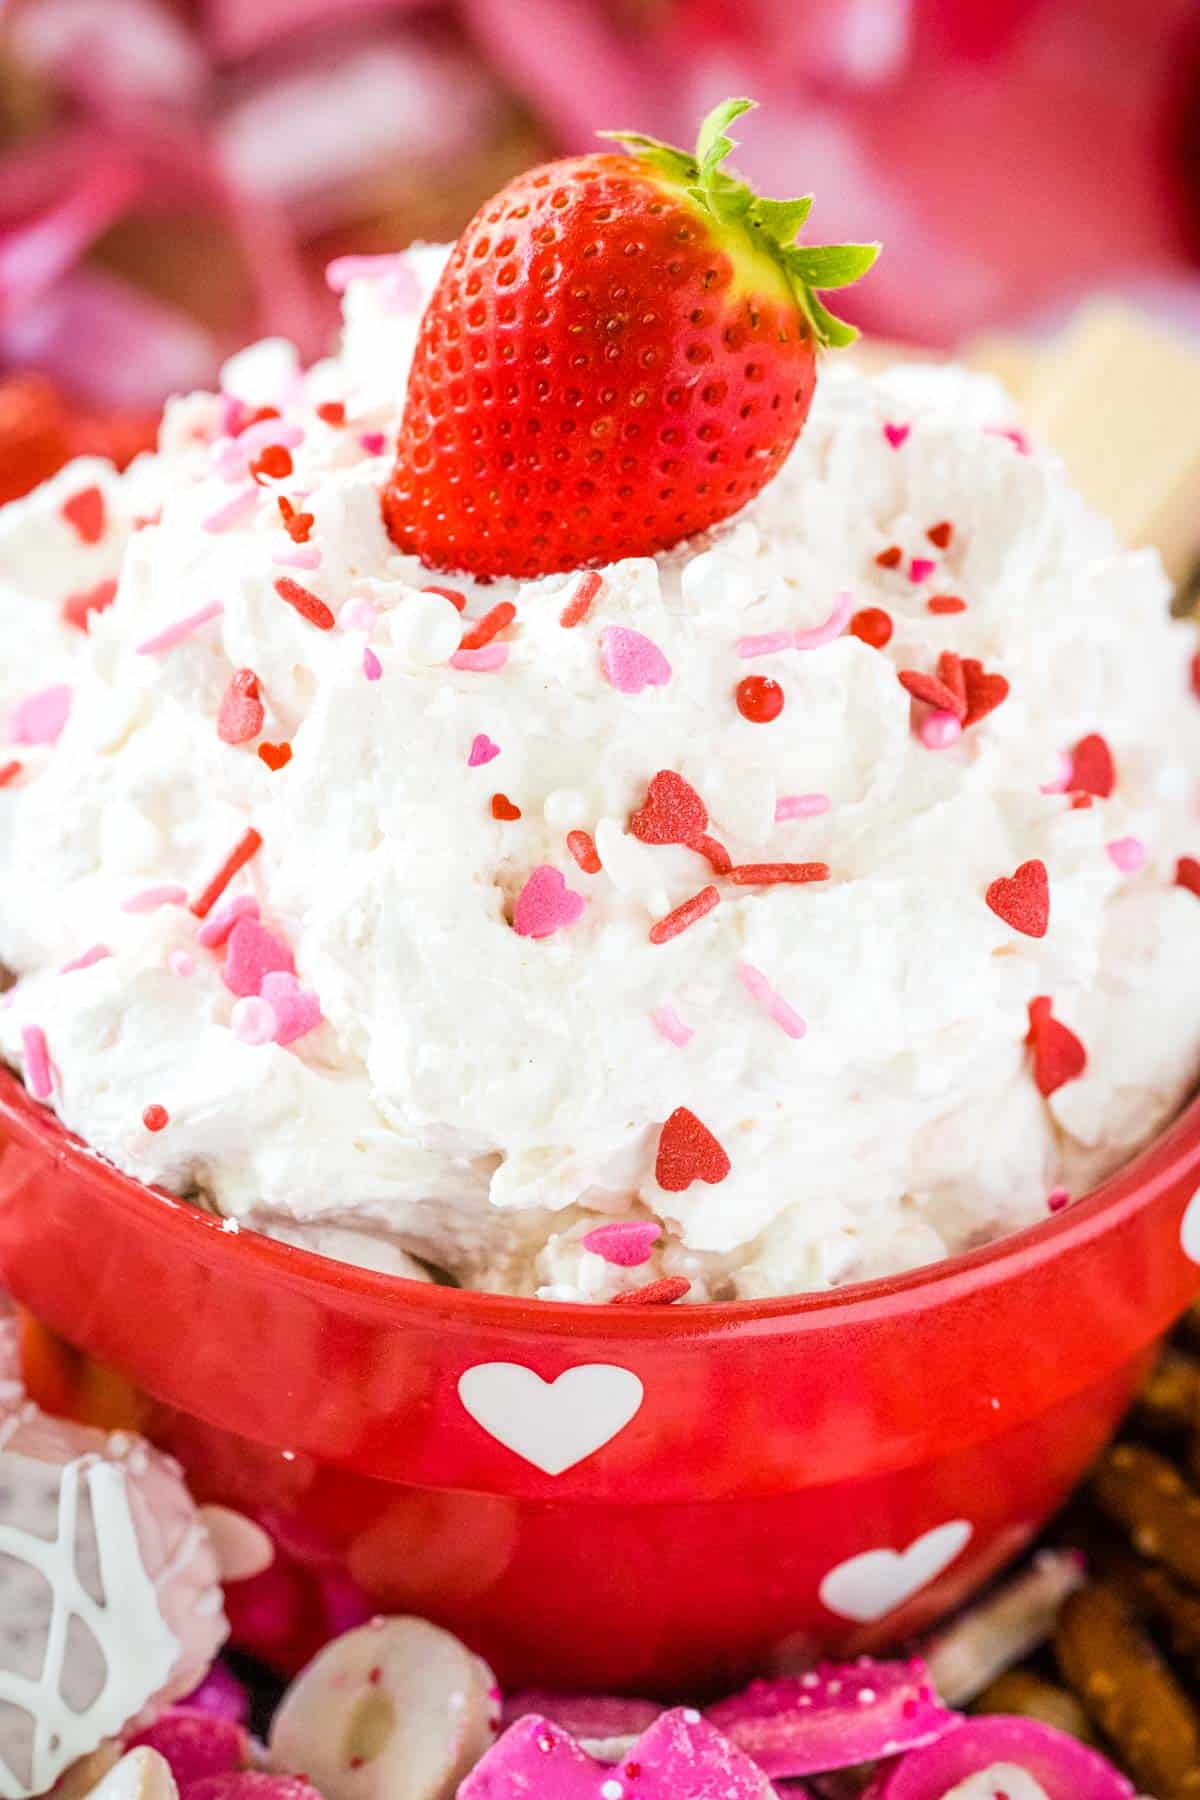 Upclose image with a red heart shaped bowl filled with heart snack cake Valentine's Day dip.